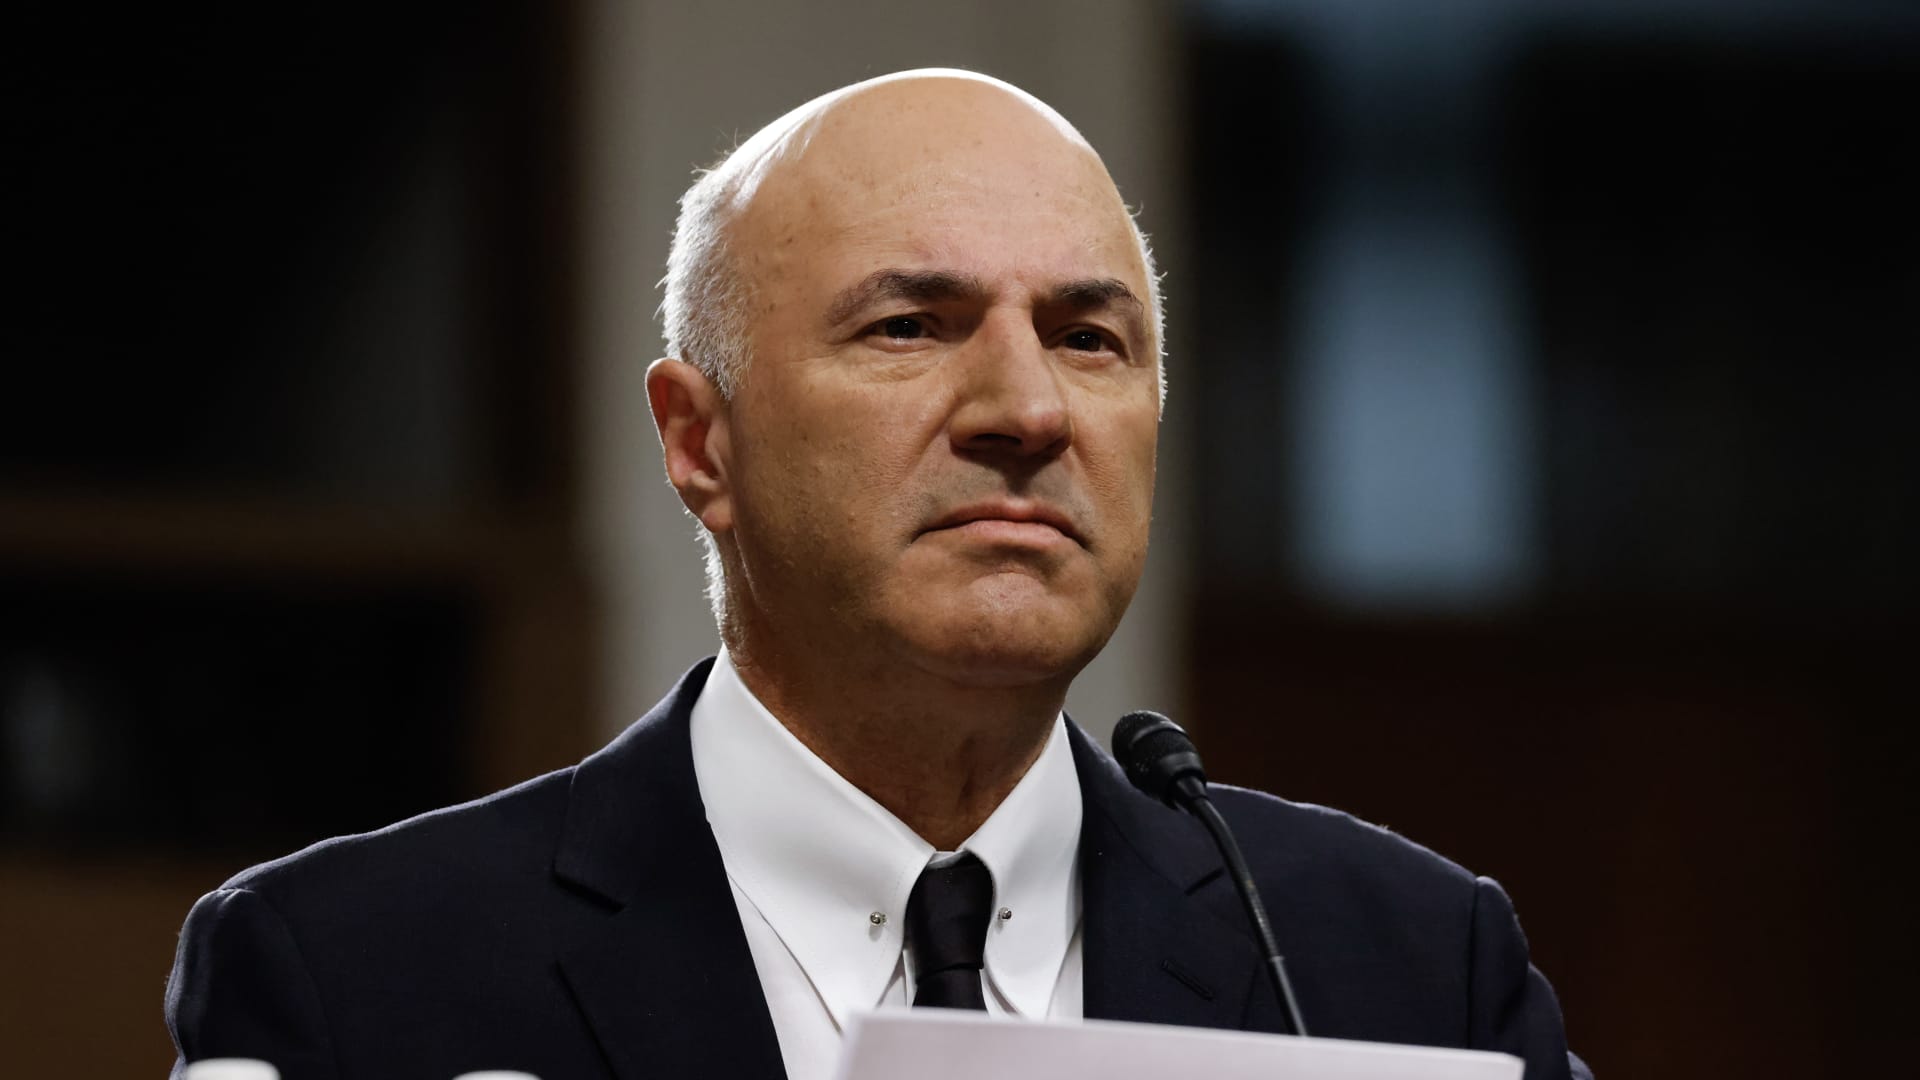 Former FTX spokesman Kevin O'Leary defends endorsement of Bankman-Fried's crypto firm